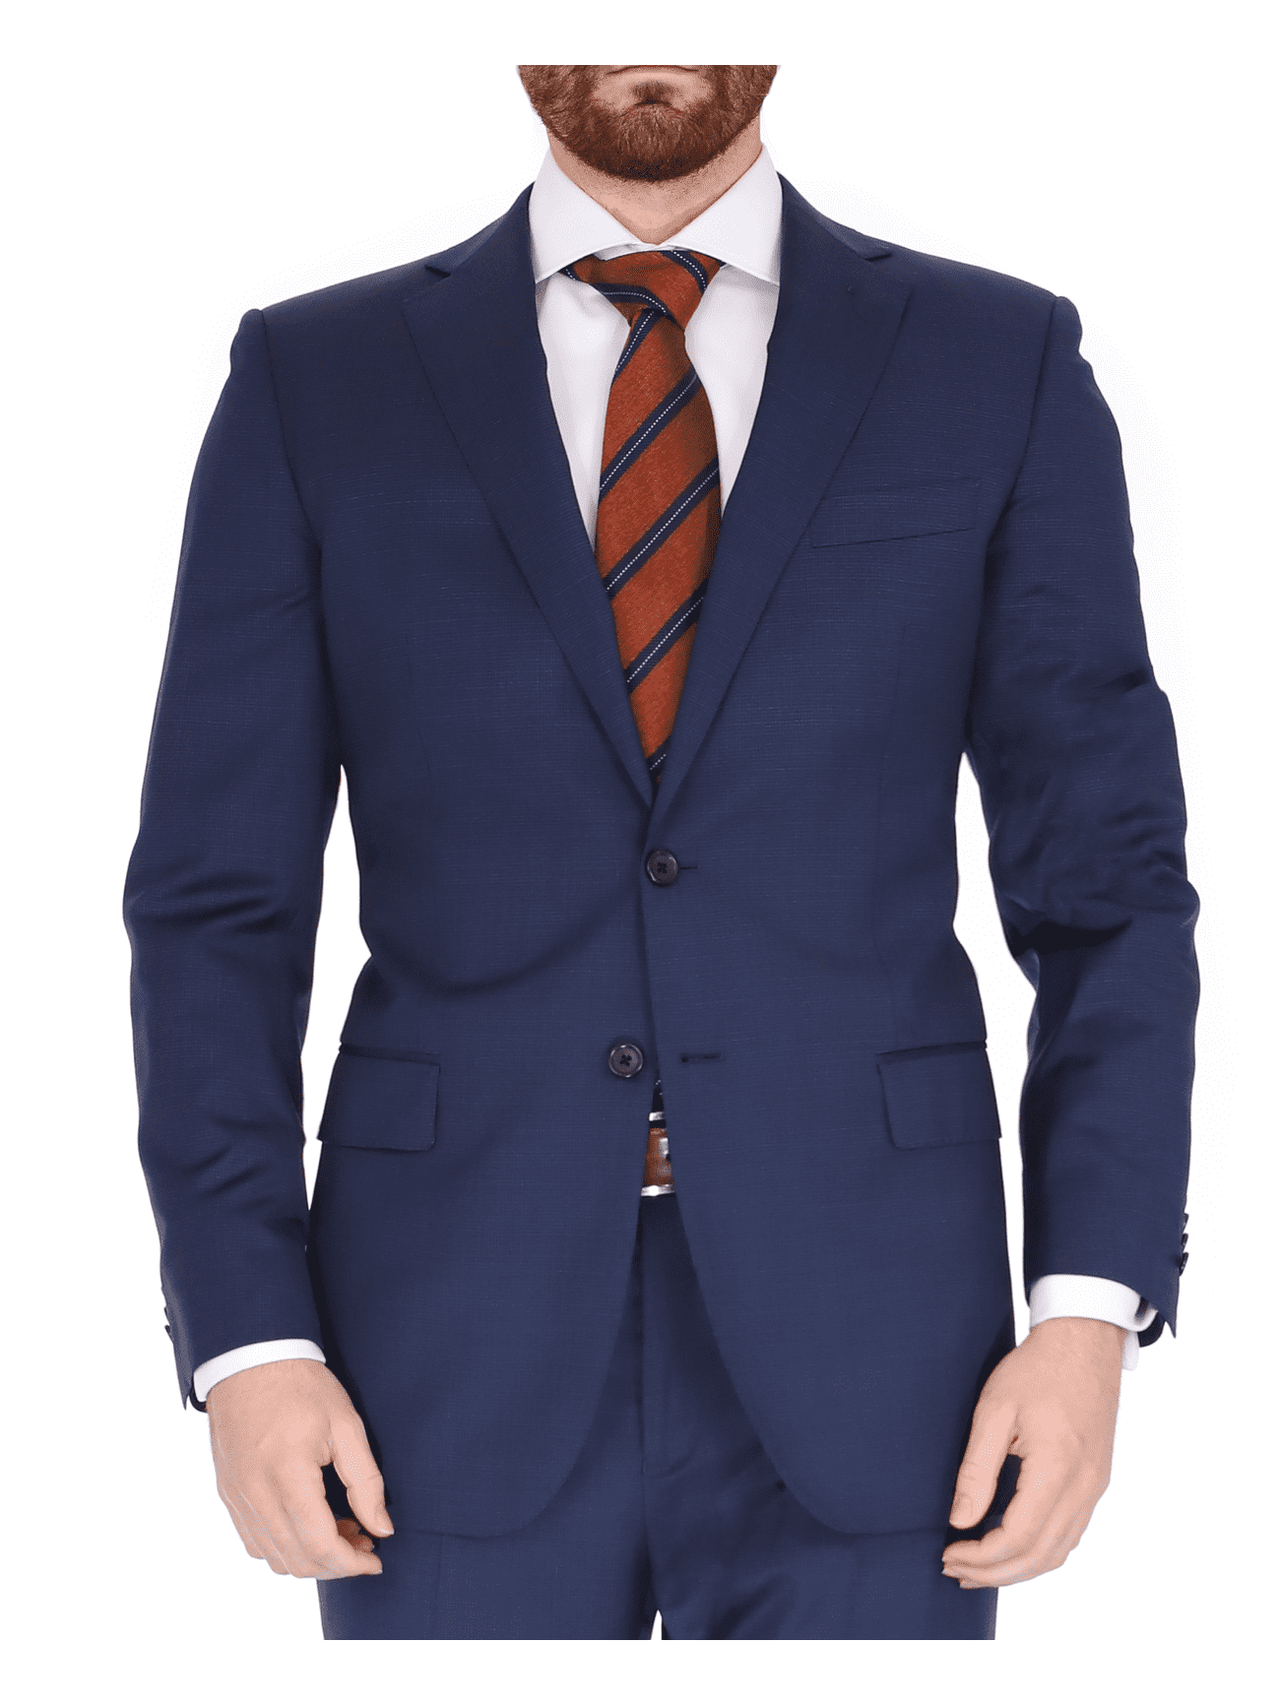 Blujacket SUITS Blujacket Mens Blue Check 100% Wool Trim Fit 2 Button Suit